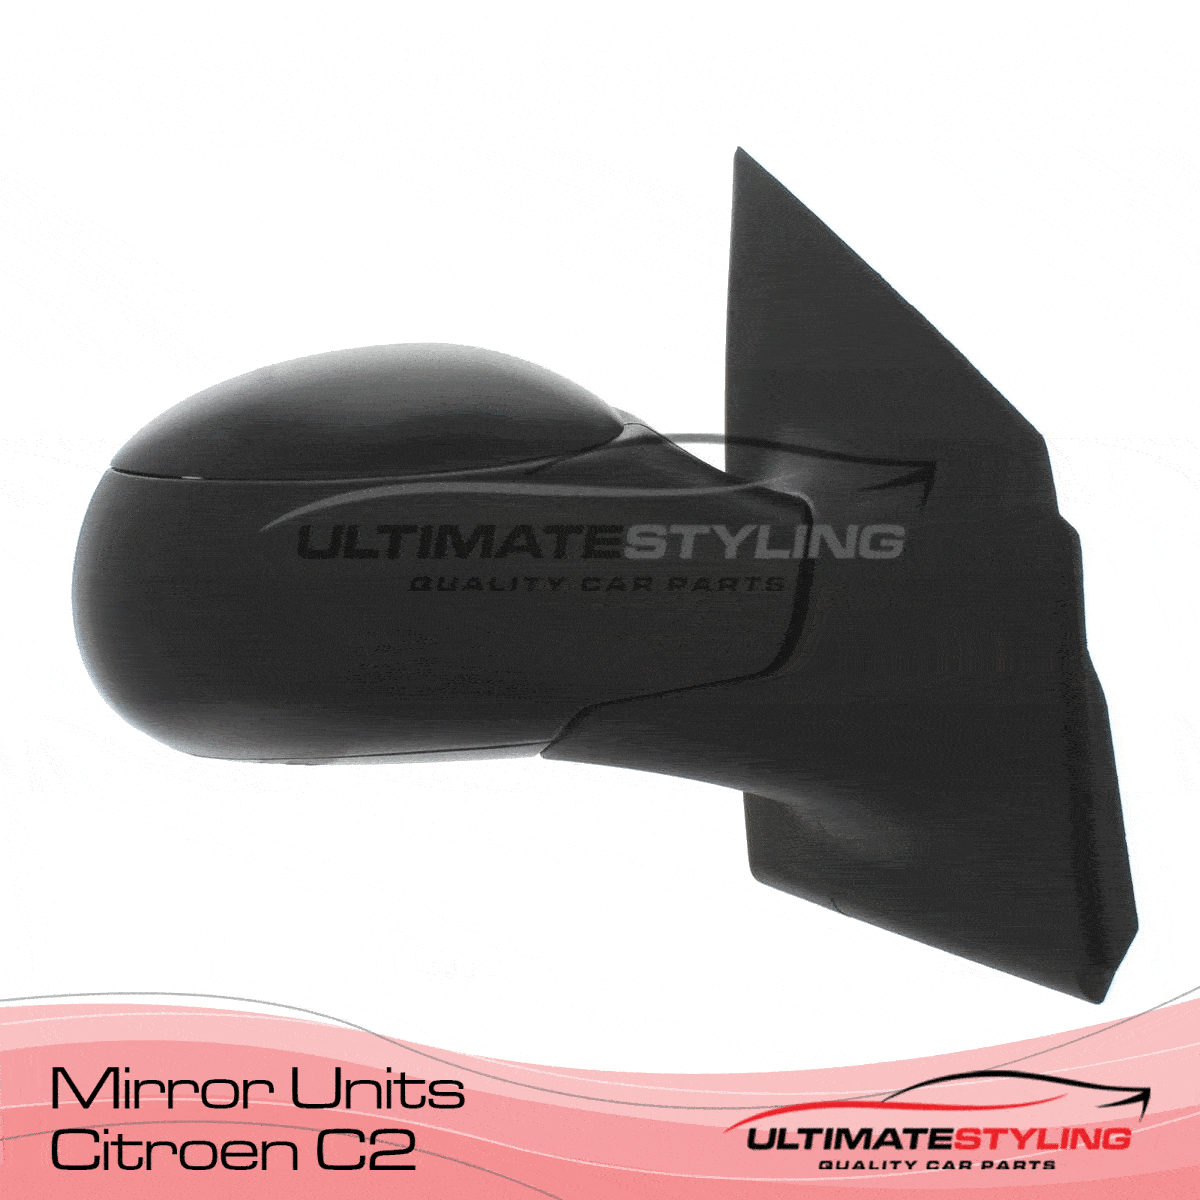 360 view of a Citroen C2 replacement wing mirror